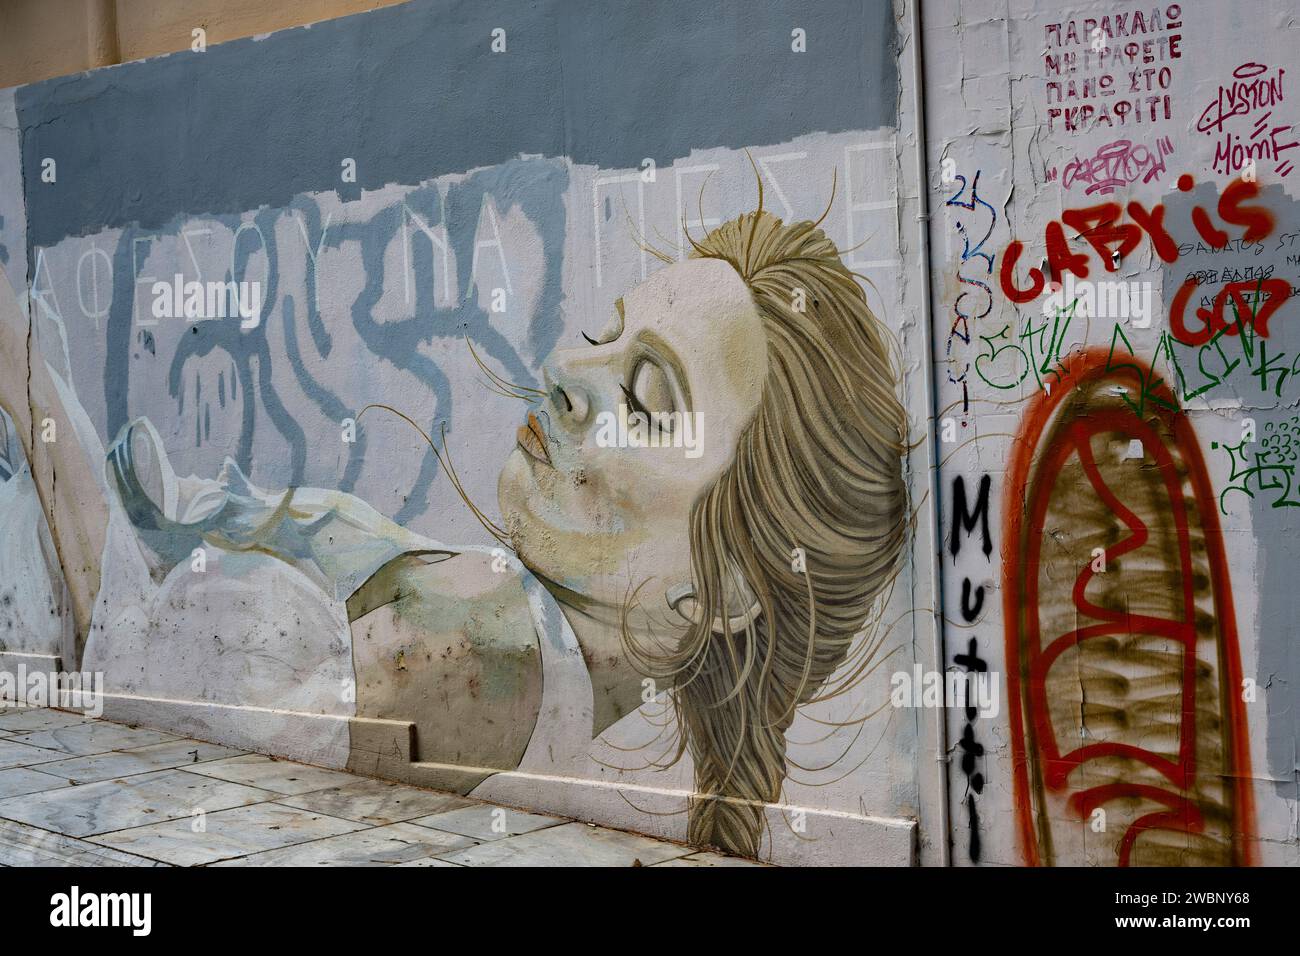 Sketch of a woman on an exterior building wall in Athens, Greece Stock Photo